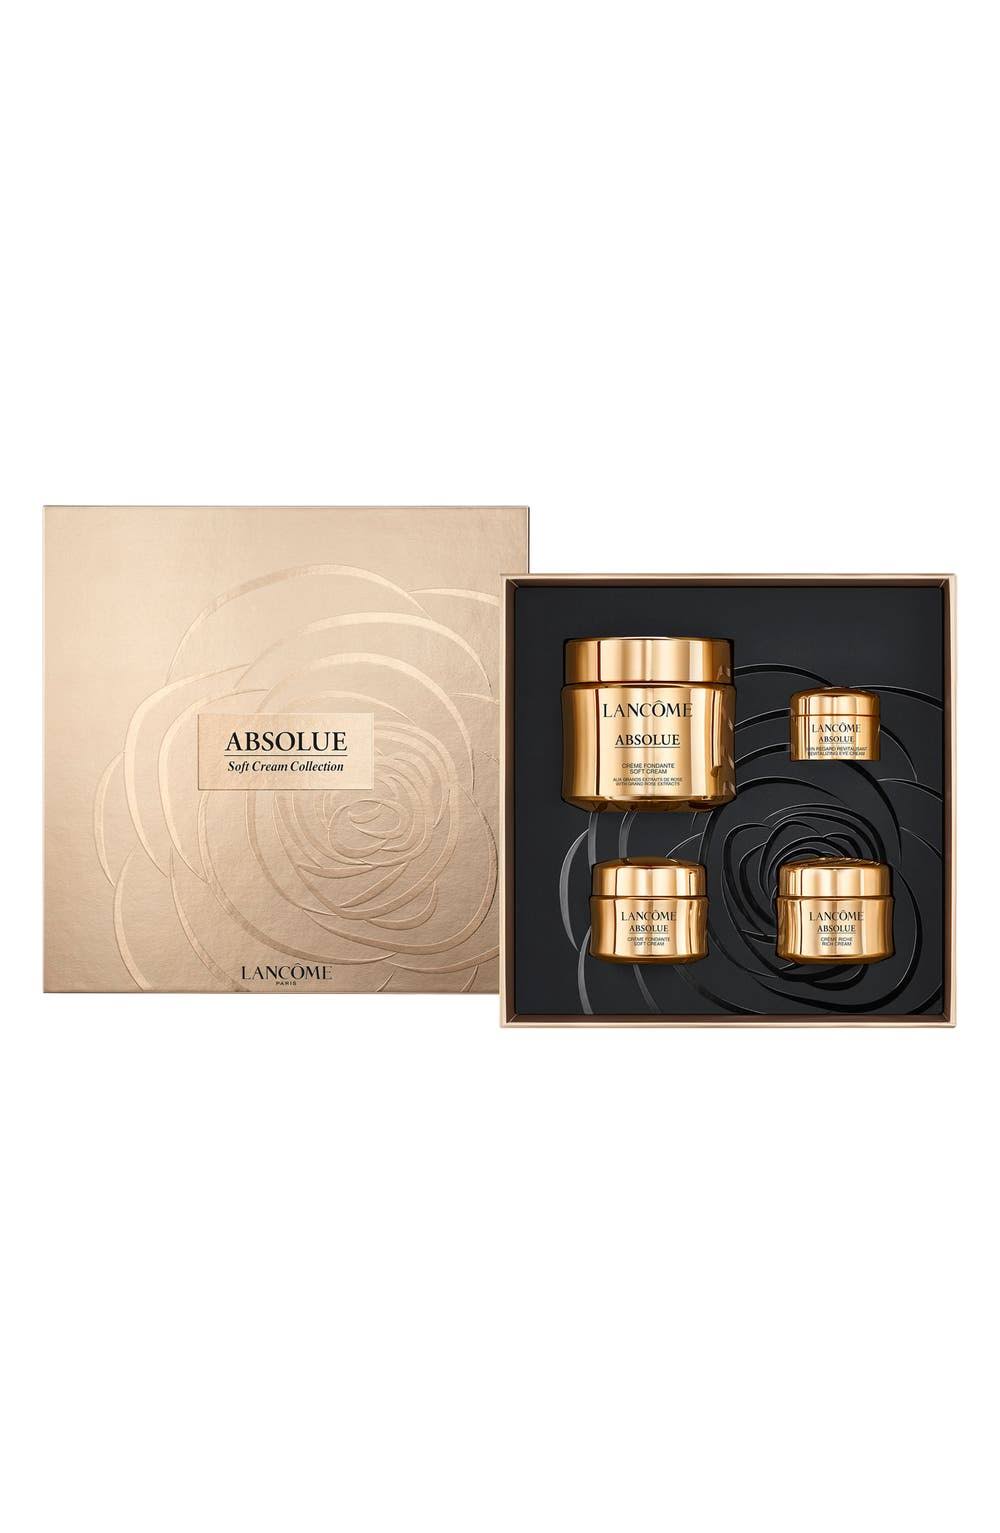 Lancome Absolue Soft Cream Collection - Gift Set with 60ml Soft Cream, 15ml Soft Cream, 5ml Eye Cream and 15ml Rich Cream